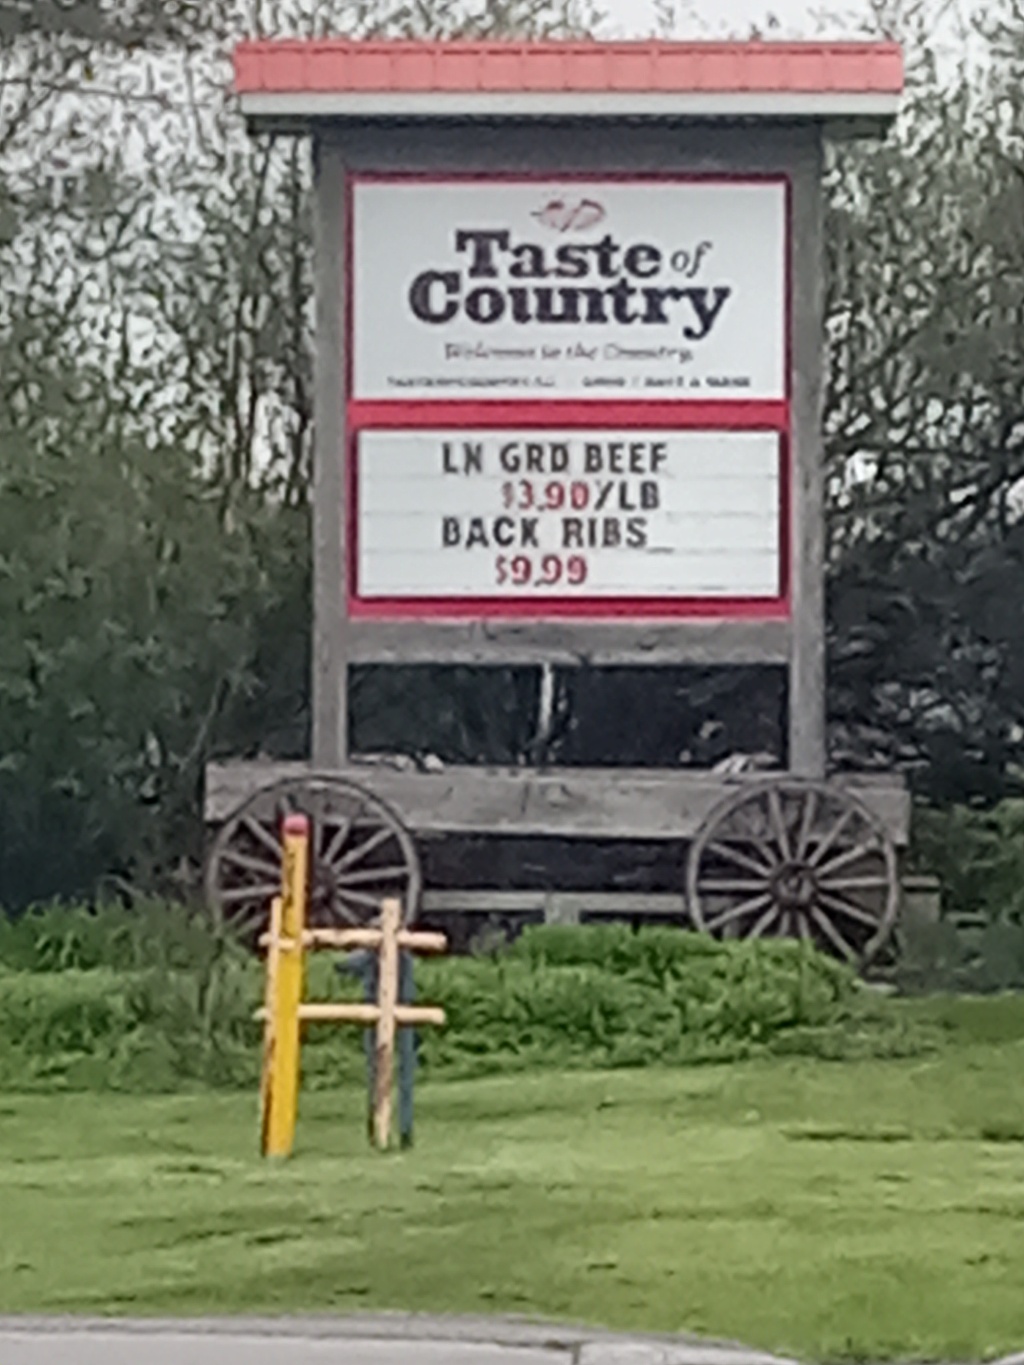 Taste of Country. A job I failed at that was my fault.